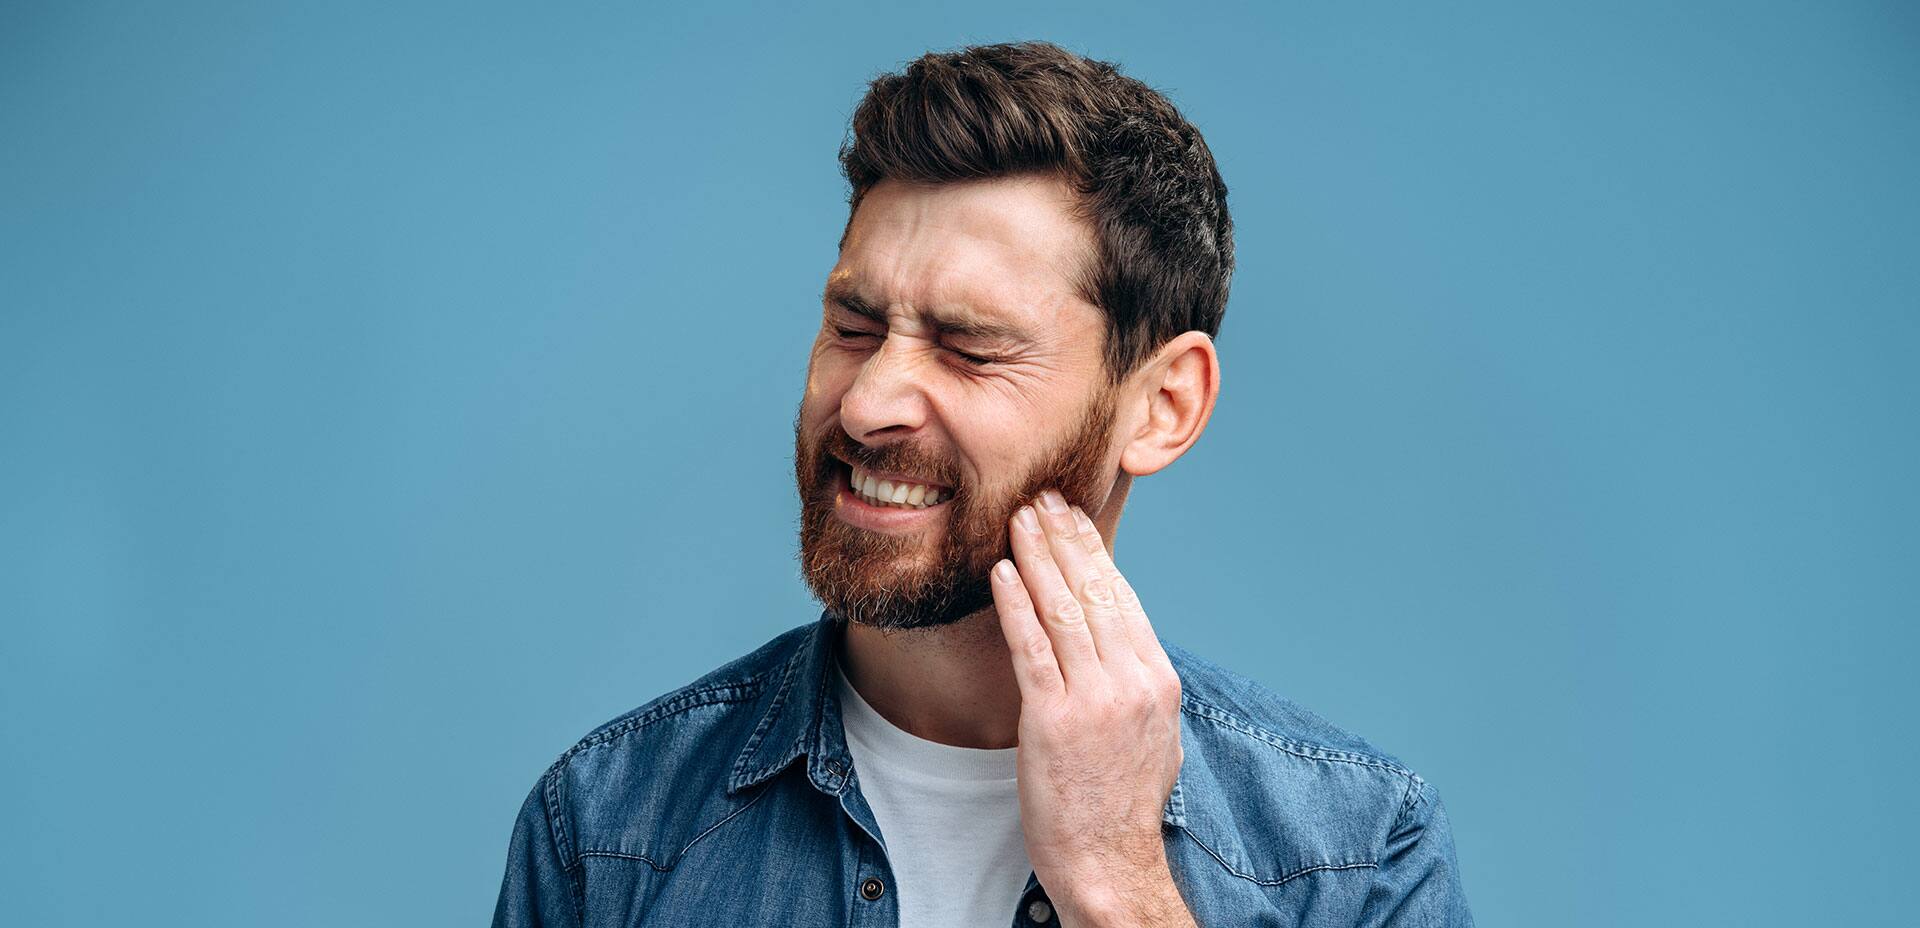 Dental problems. Portrait of unhealthy man pressing sore cheek, suffering acute toothache, periodontal disease, cavities or jaw pain. Indoor studio shot isolated on blue background